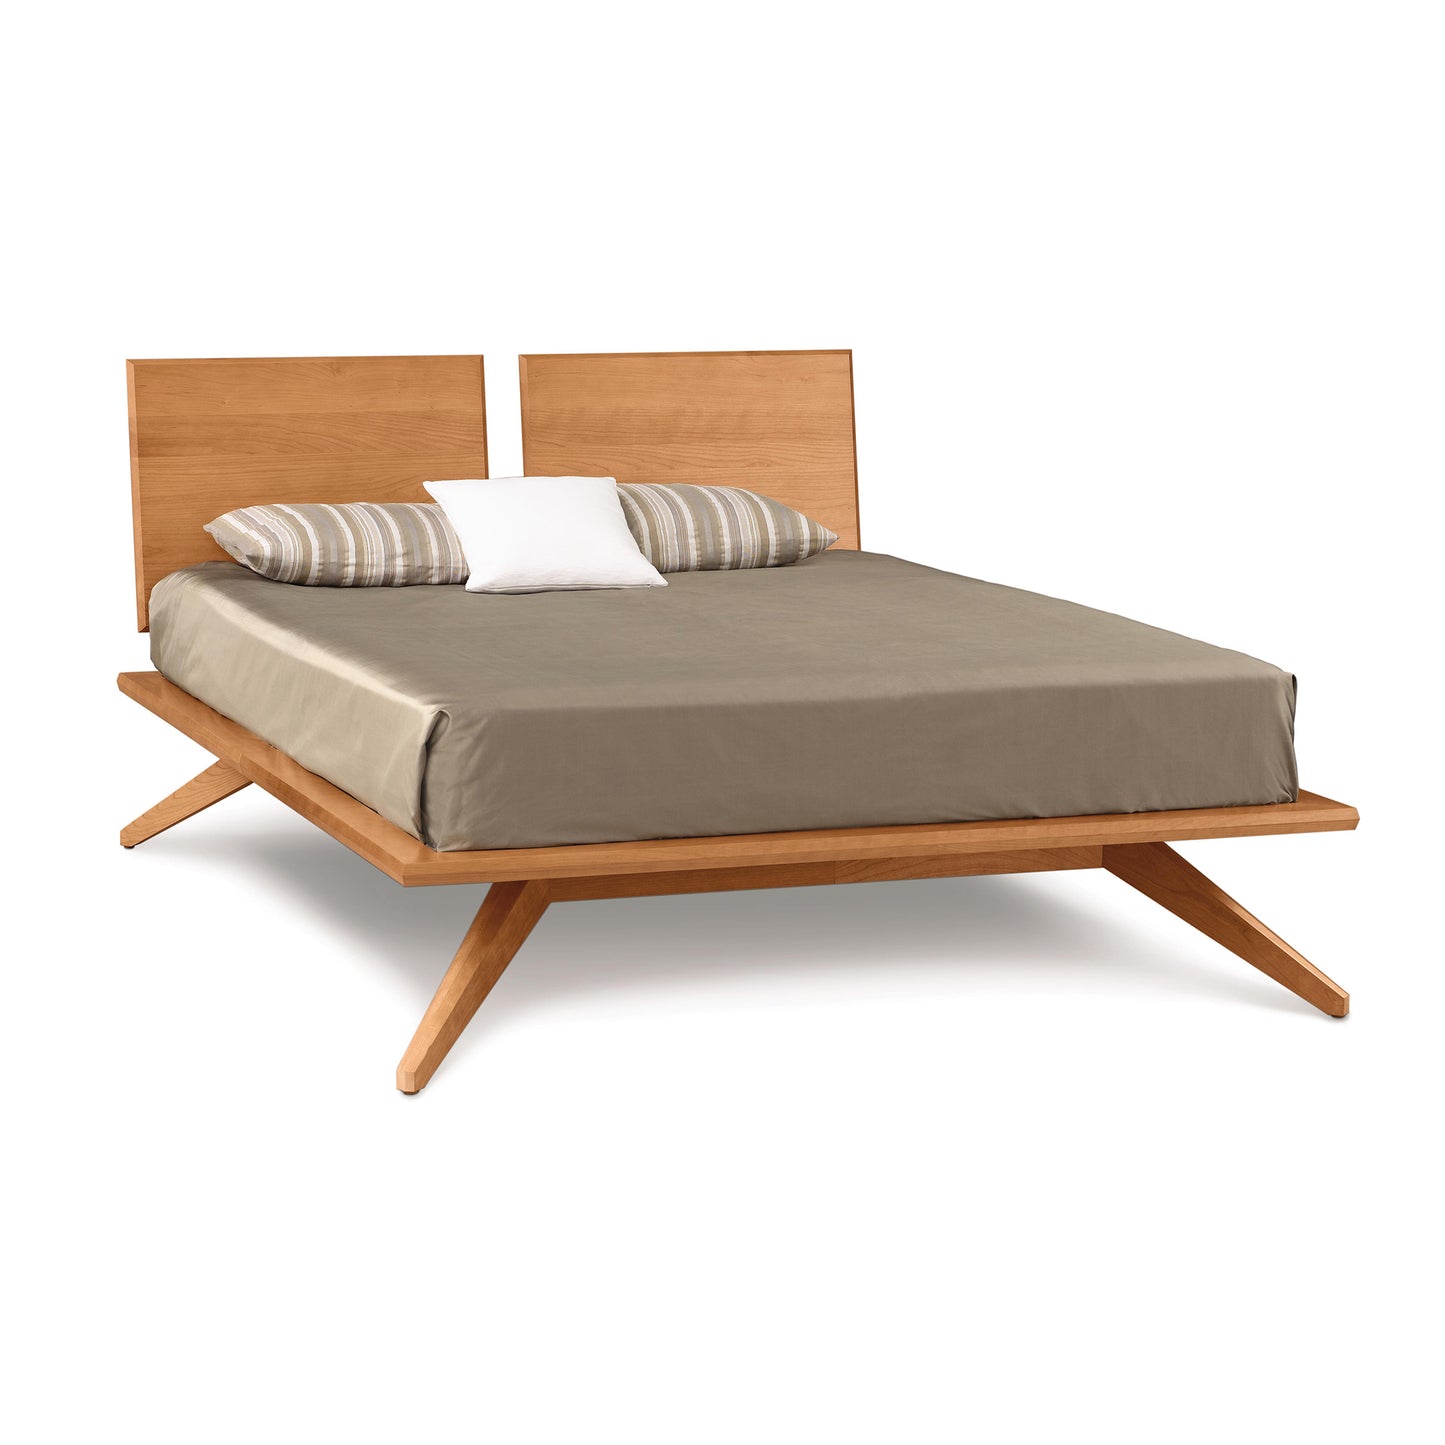 An Astrid Cherry Platform Bed from Copeland Furniture with a wooden headboard made from eco-friendly, sustainably harvested solid cherry wood.